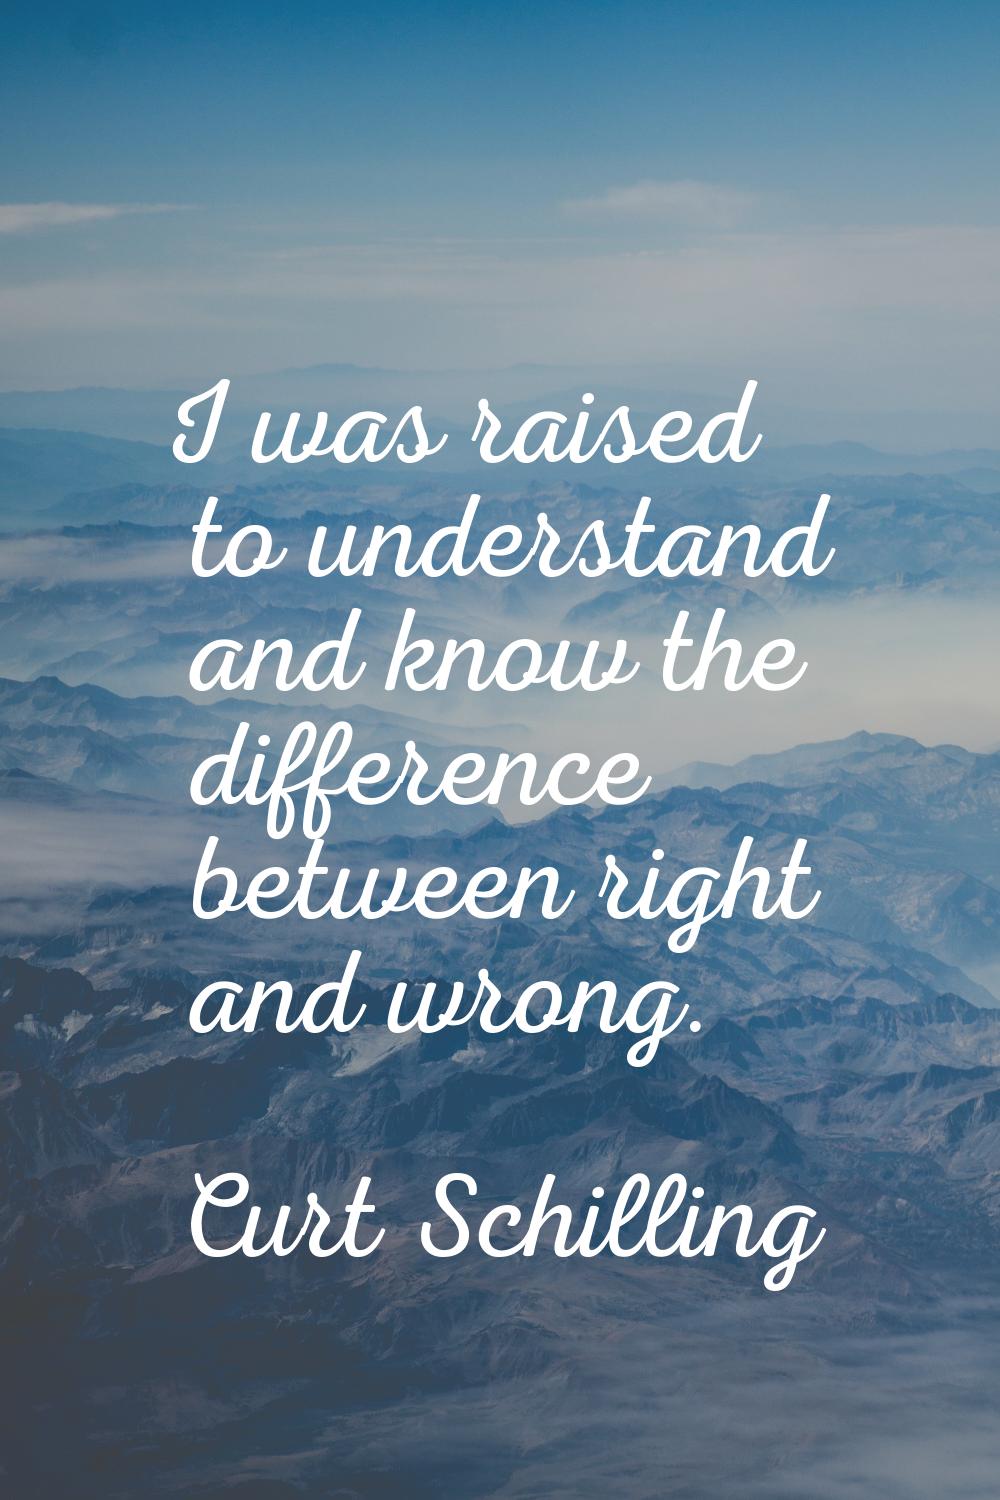 I was raised to understand and know the difference between right and wrong.